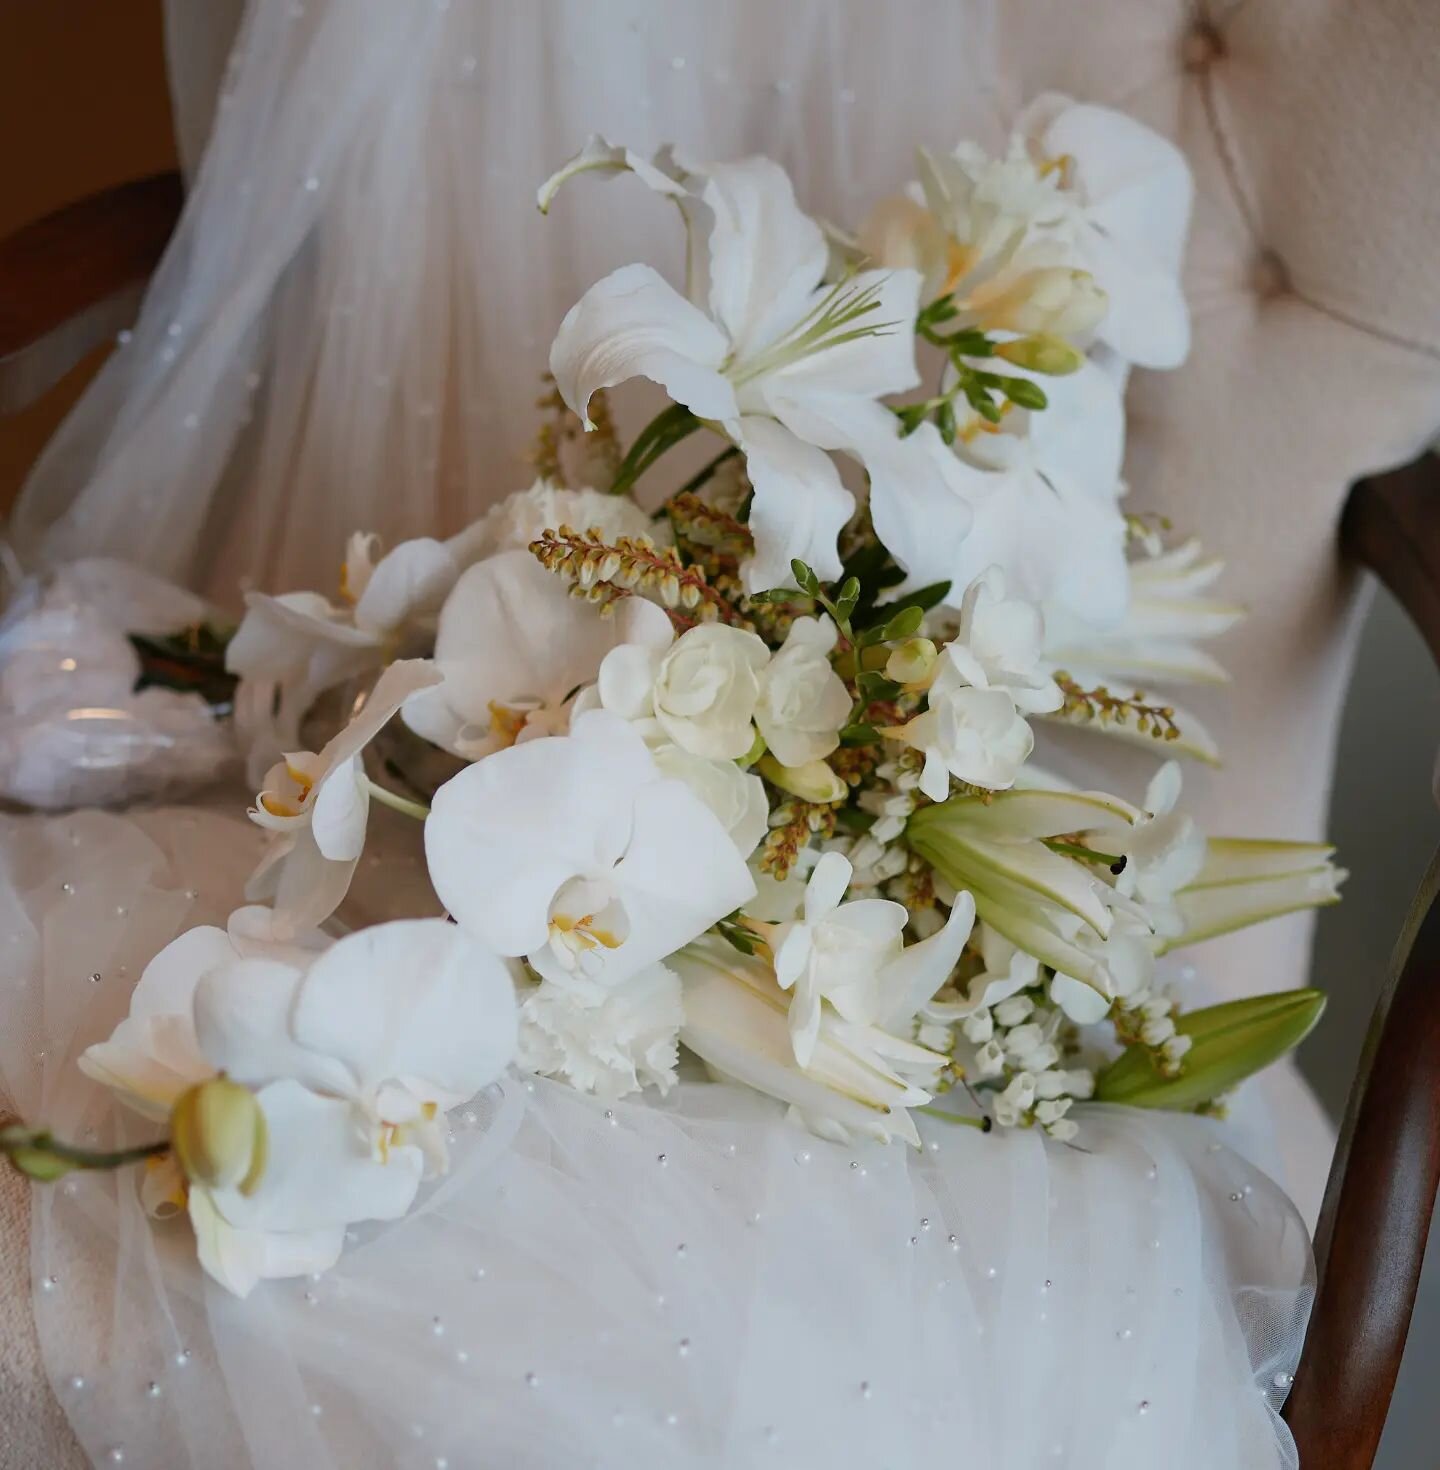 Lilies, phaleas, freesia and flowering pieris,  what's not to love about winter bouquets.
Photographer @curate.weddings